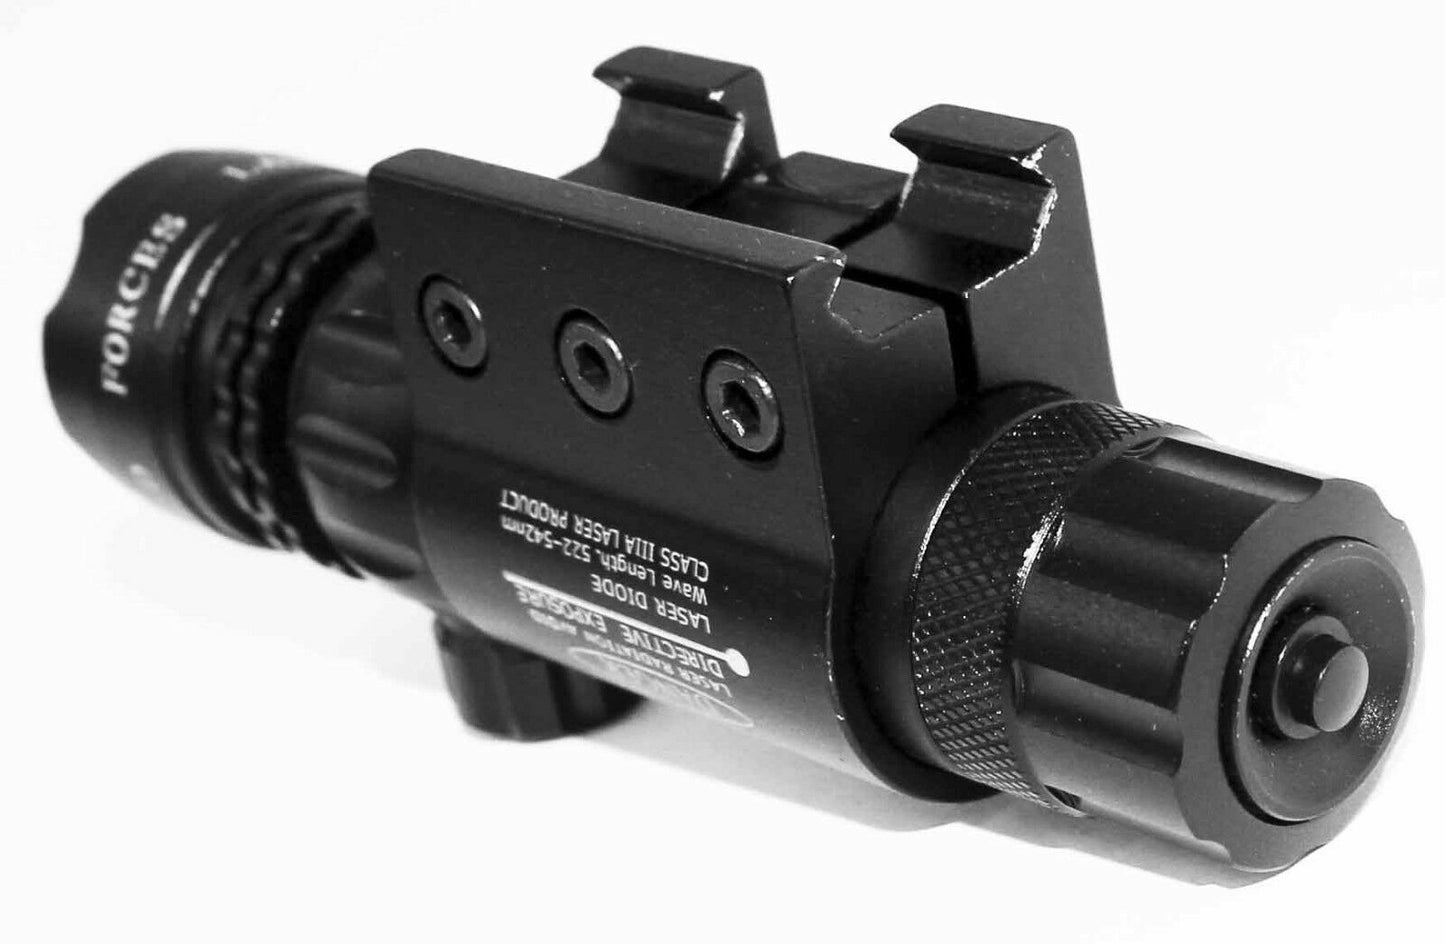 Tactical Green Dot Laser Scope Picatinny Style Compatible With BullPup Kel-Tec KSG 12 Gauge Pump.